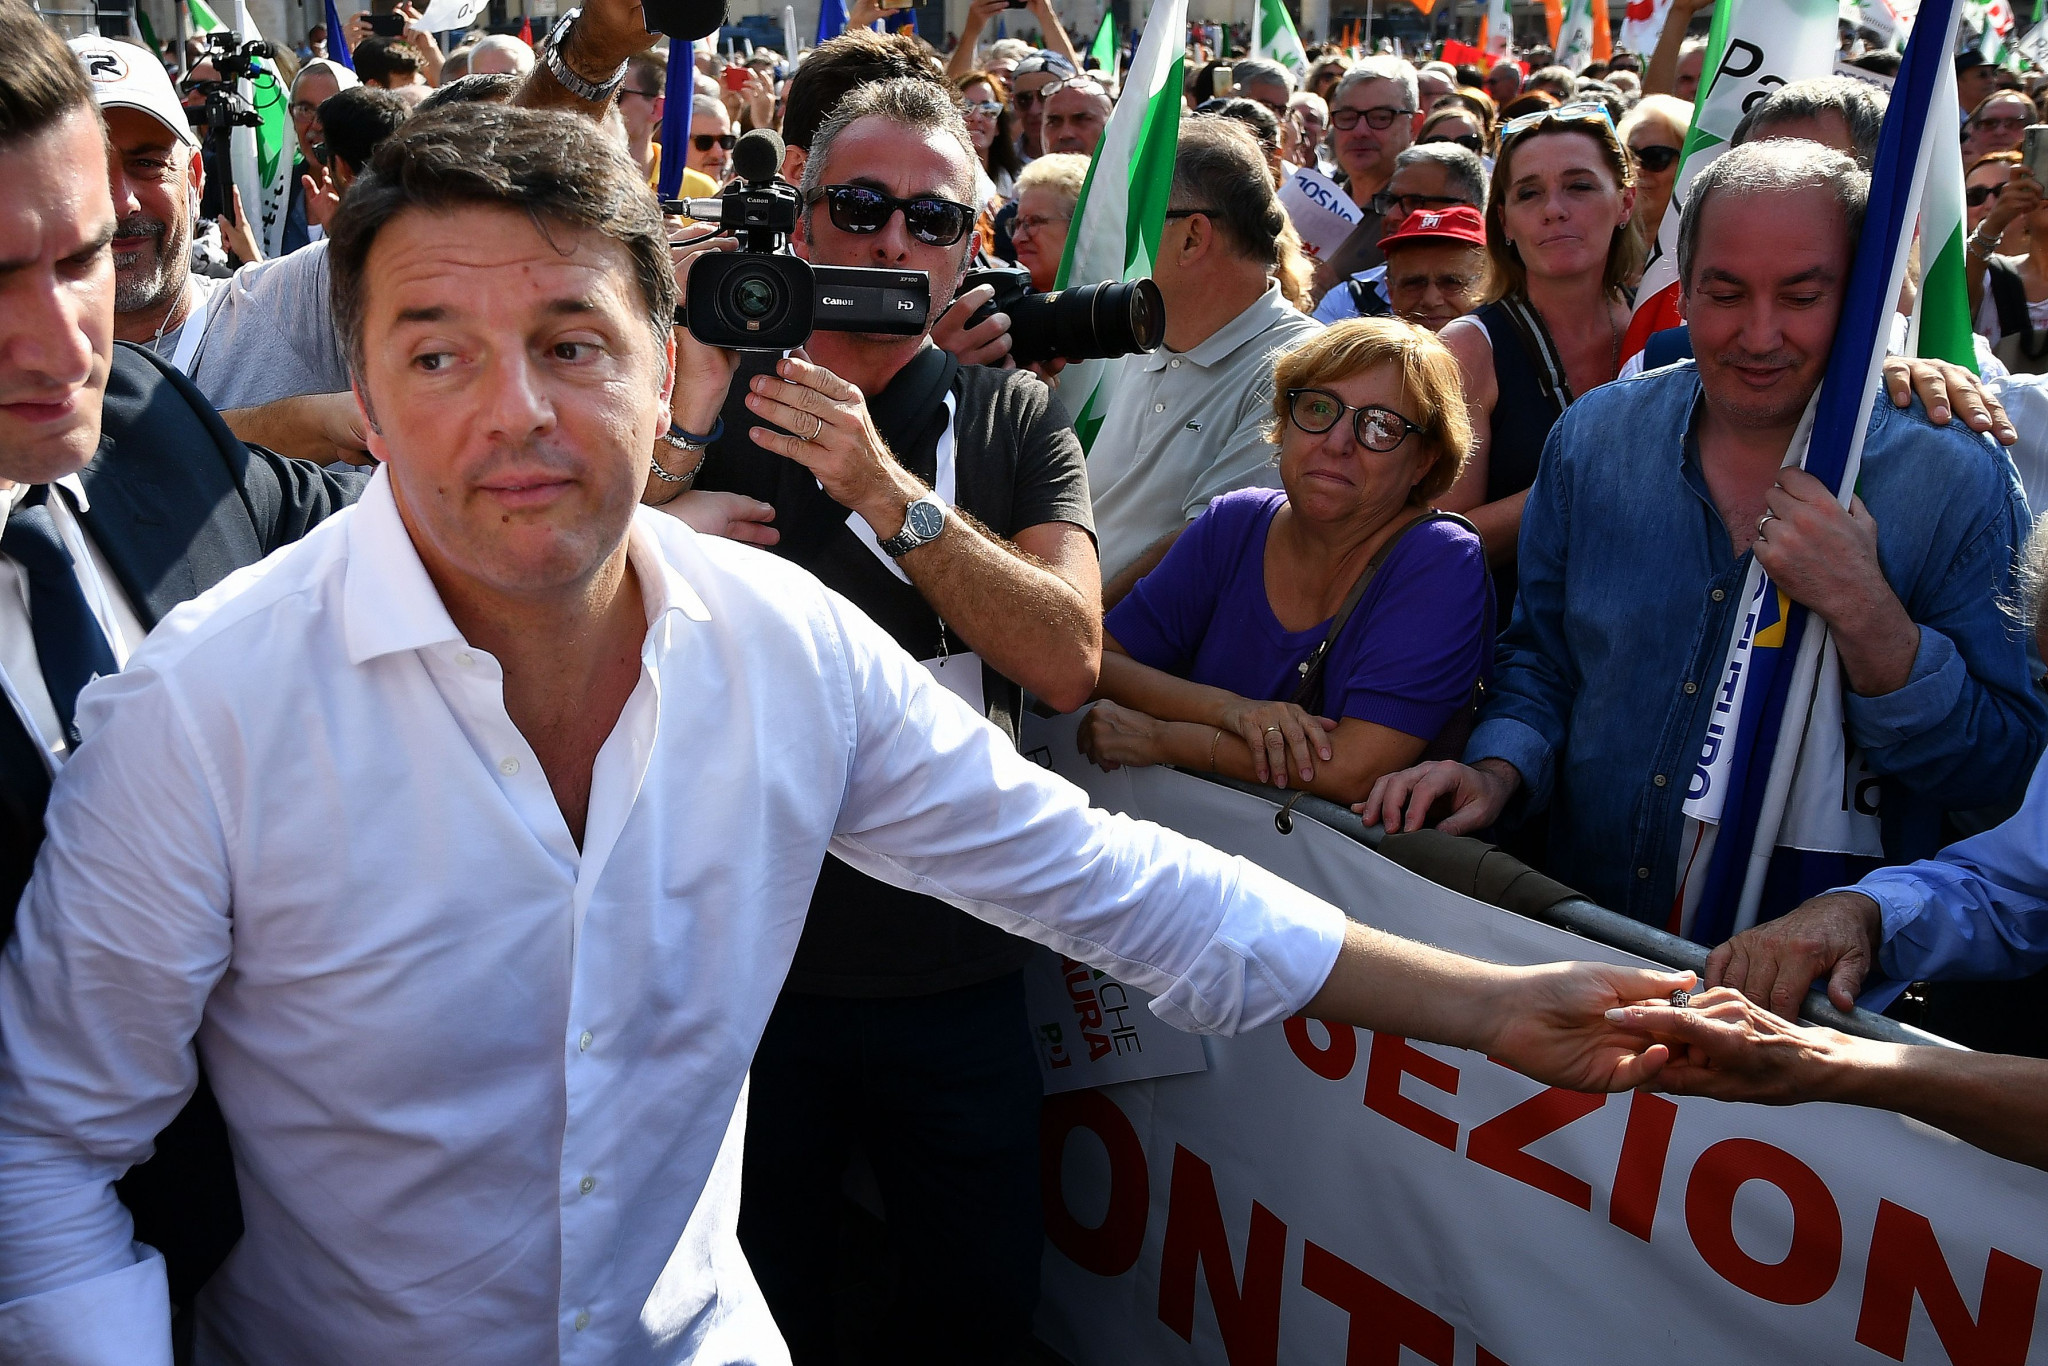 Italy's Prime Minister Matteo Renzi claimed bidding for the Olympic Games was an 